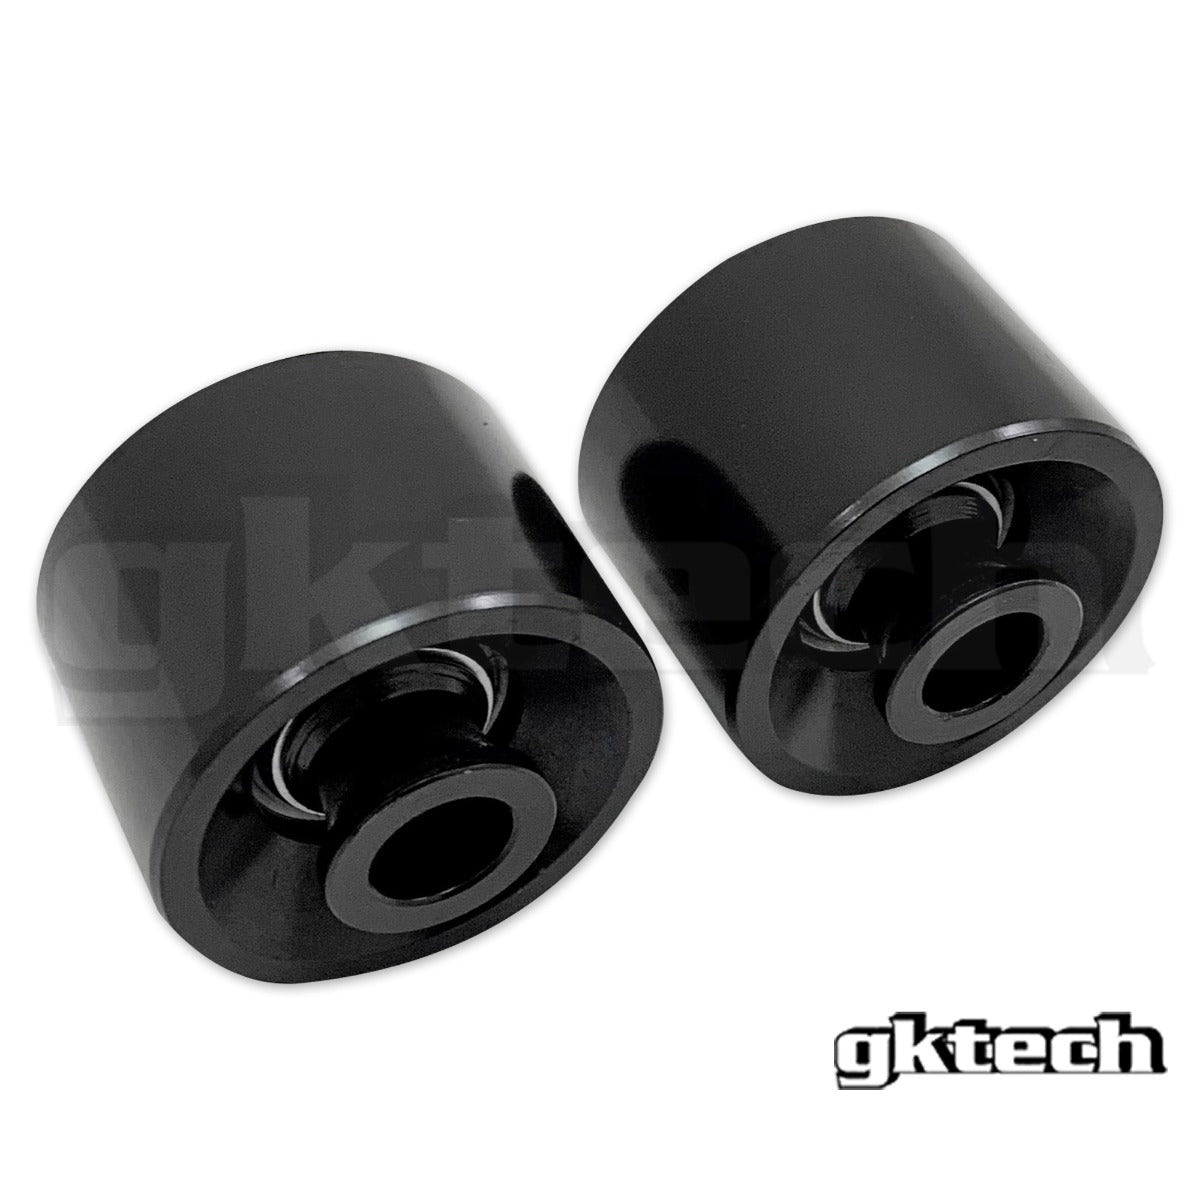 86 / GR86 / BRZ REAR KNUCKLE TRACTION ARM SPHERICAL BUSHING